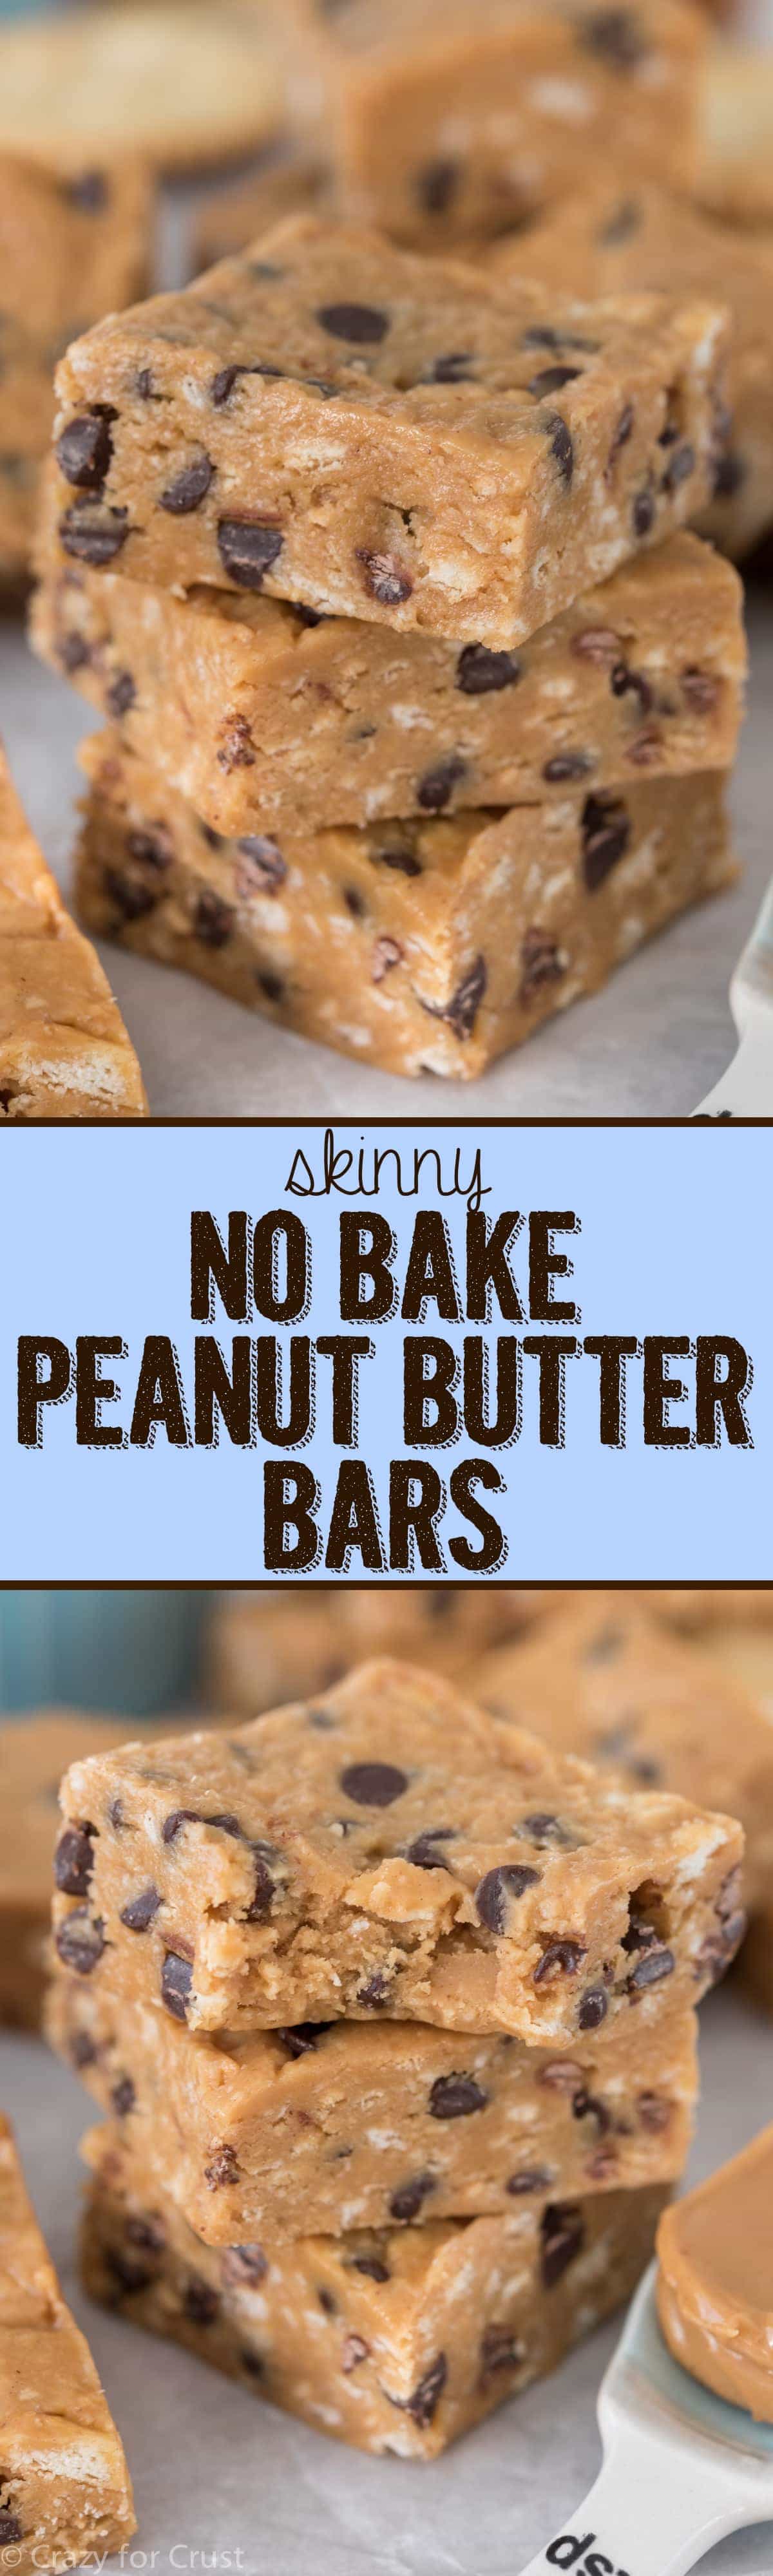 Skinny No Bake Peanut Butter Bars - this easy peanut butter bar recipe has way less calories and fat than the regular version and they're JUST as good if not better!